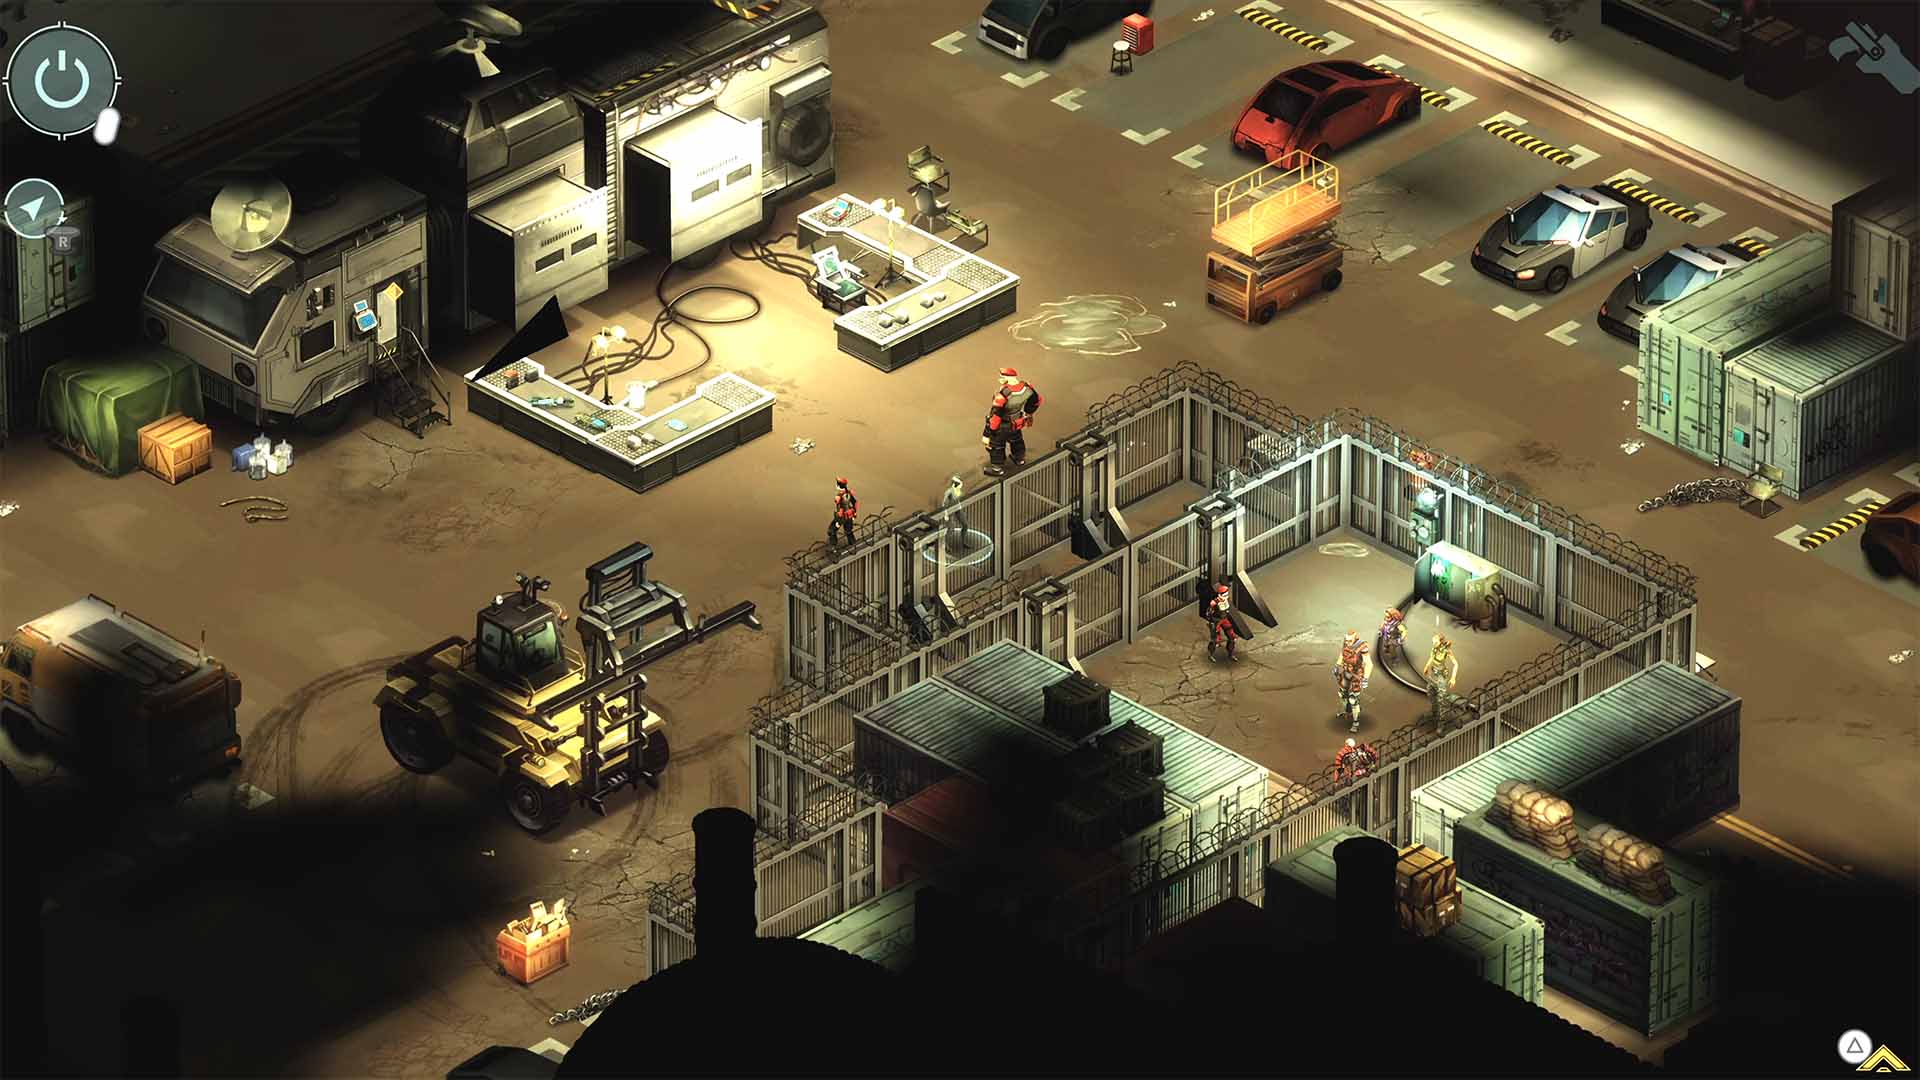 Shadowrun Trilogy arriving on consoles in June, coming to Game Pass